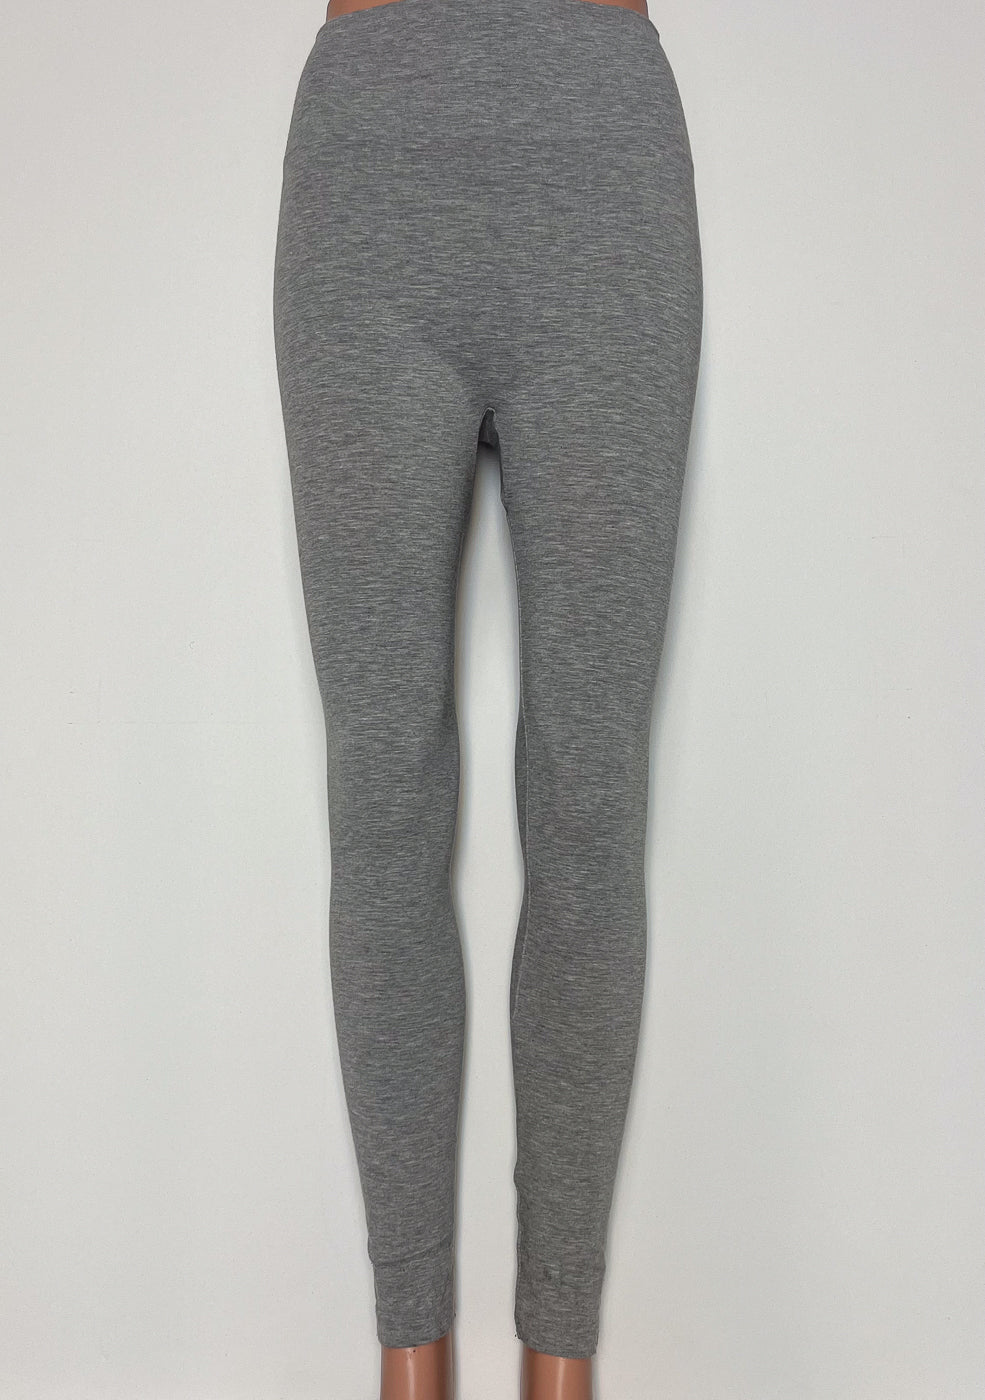 Web Exclusive Cotton High Waisted Leggings